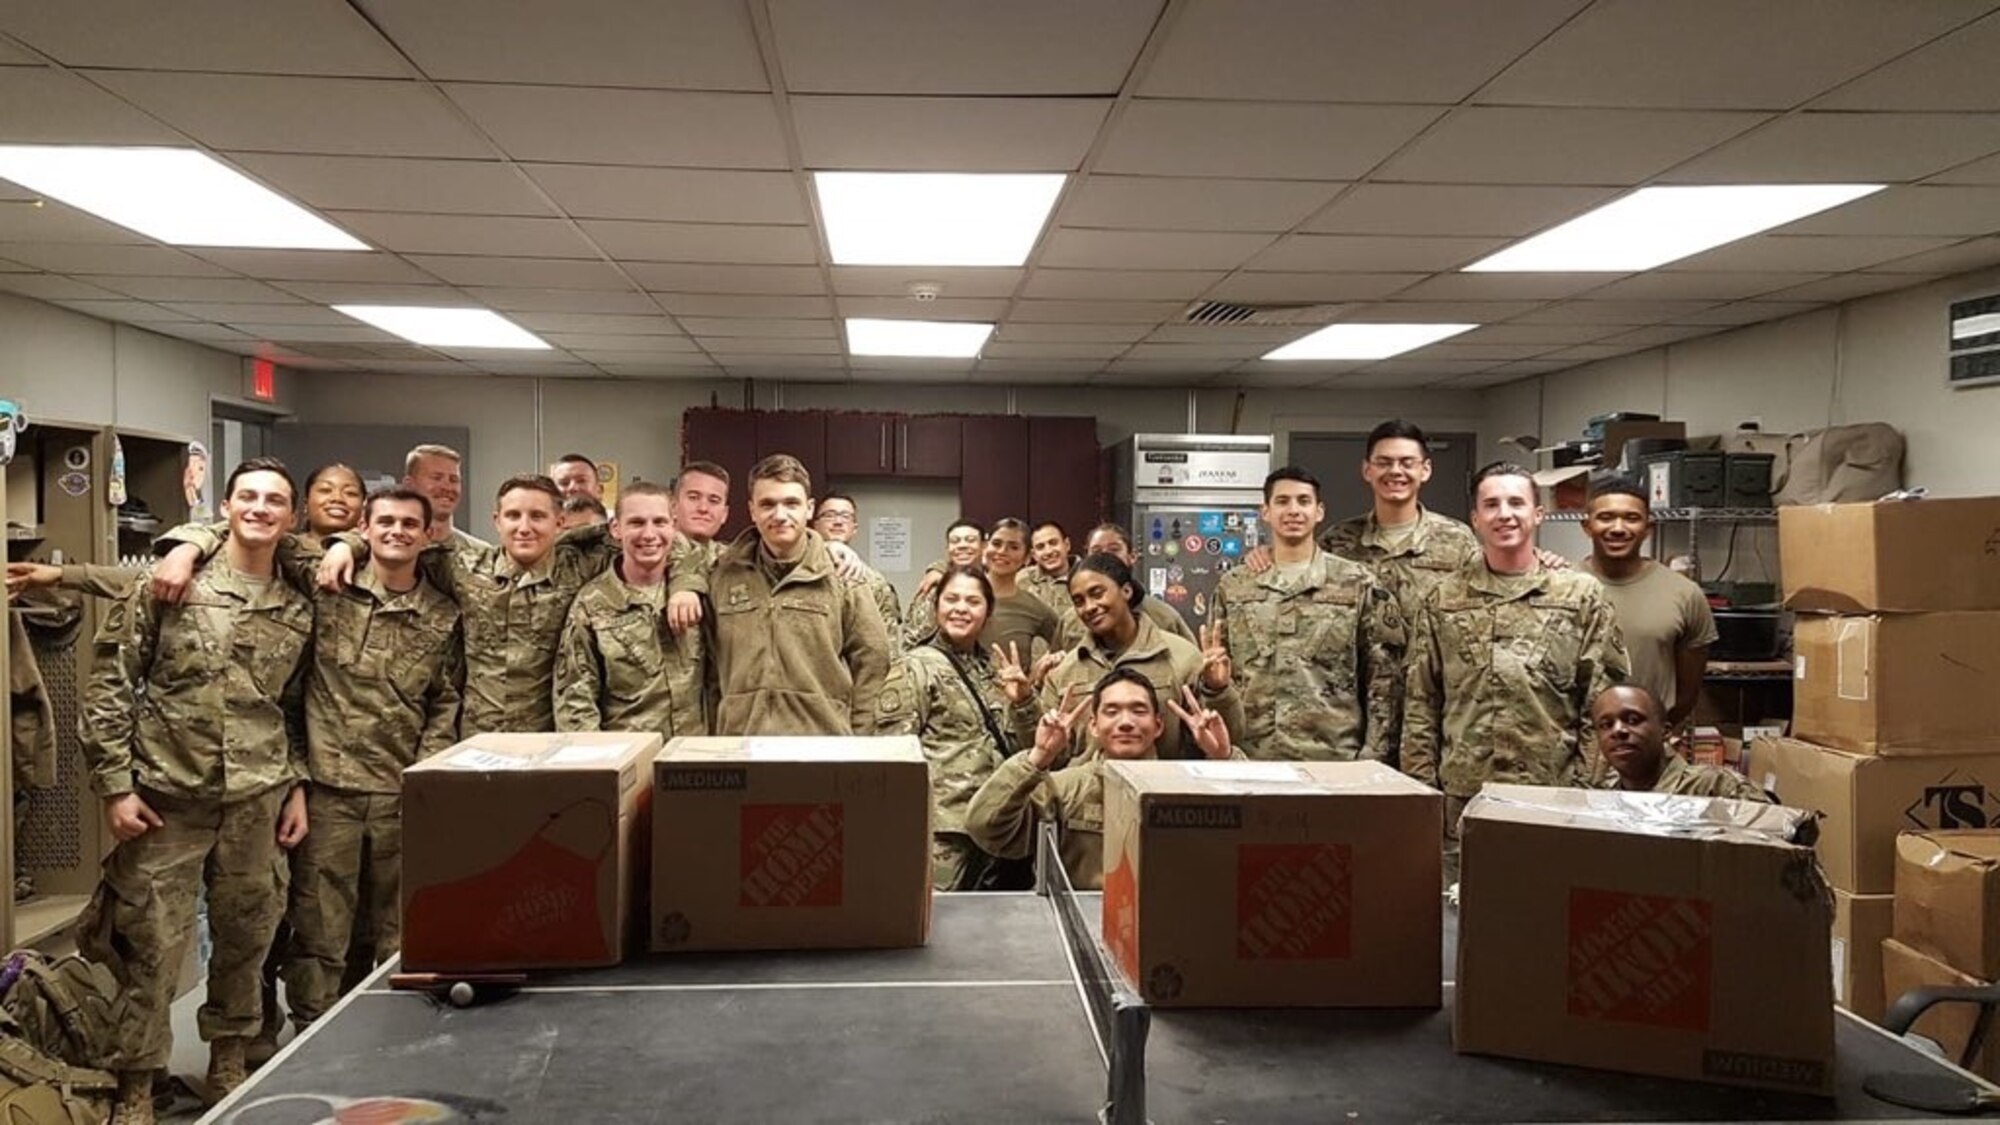 A Luke NCO, cousin send 1,500 care packages to deployed military members